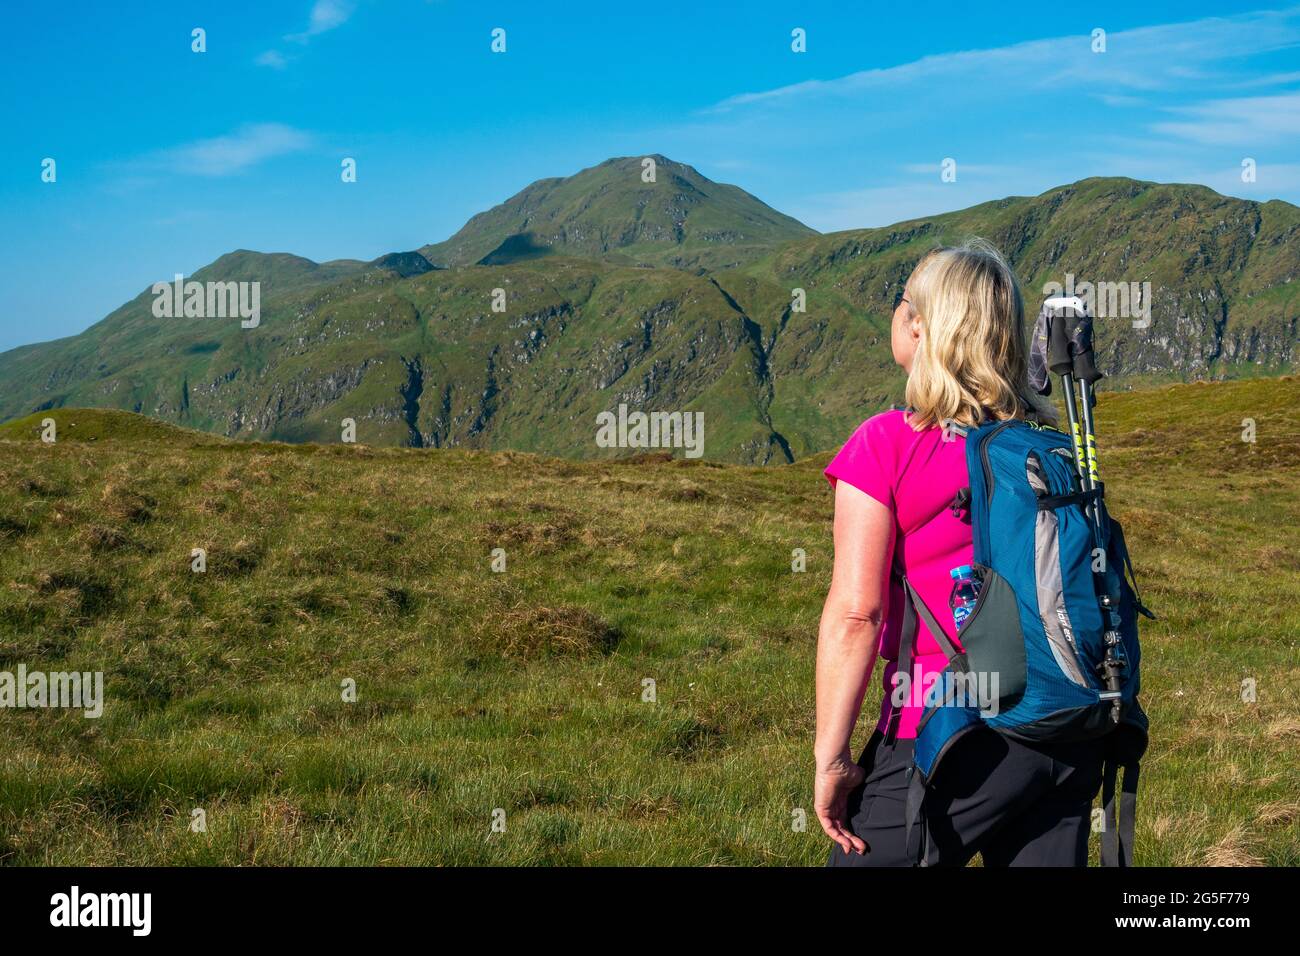 Walker in front of the Tarmachan ridge, seen from the path to Meall Corranaich, with the munro peak of Meall Nan Tarmachan visible in Scotland Stock Photo